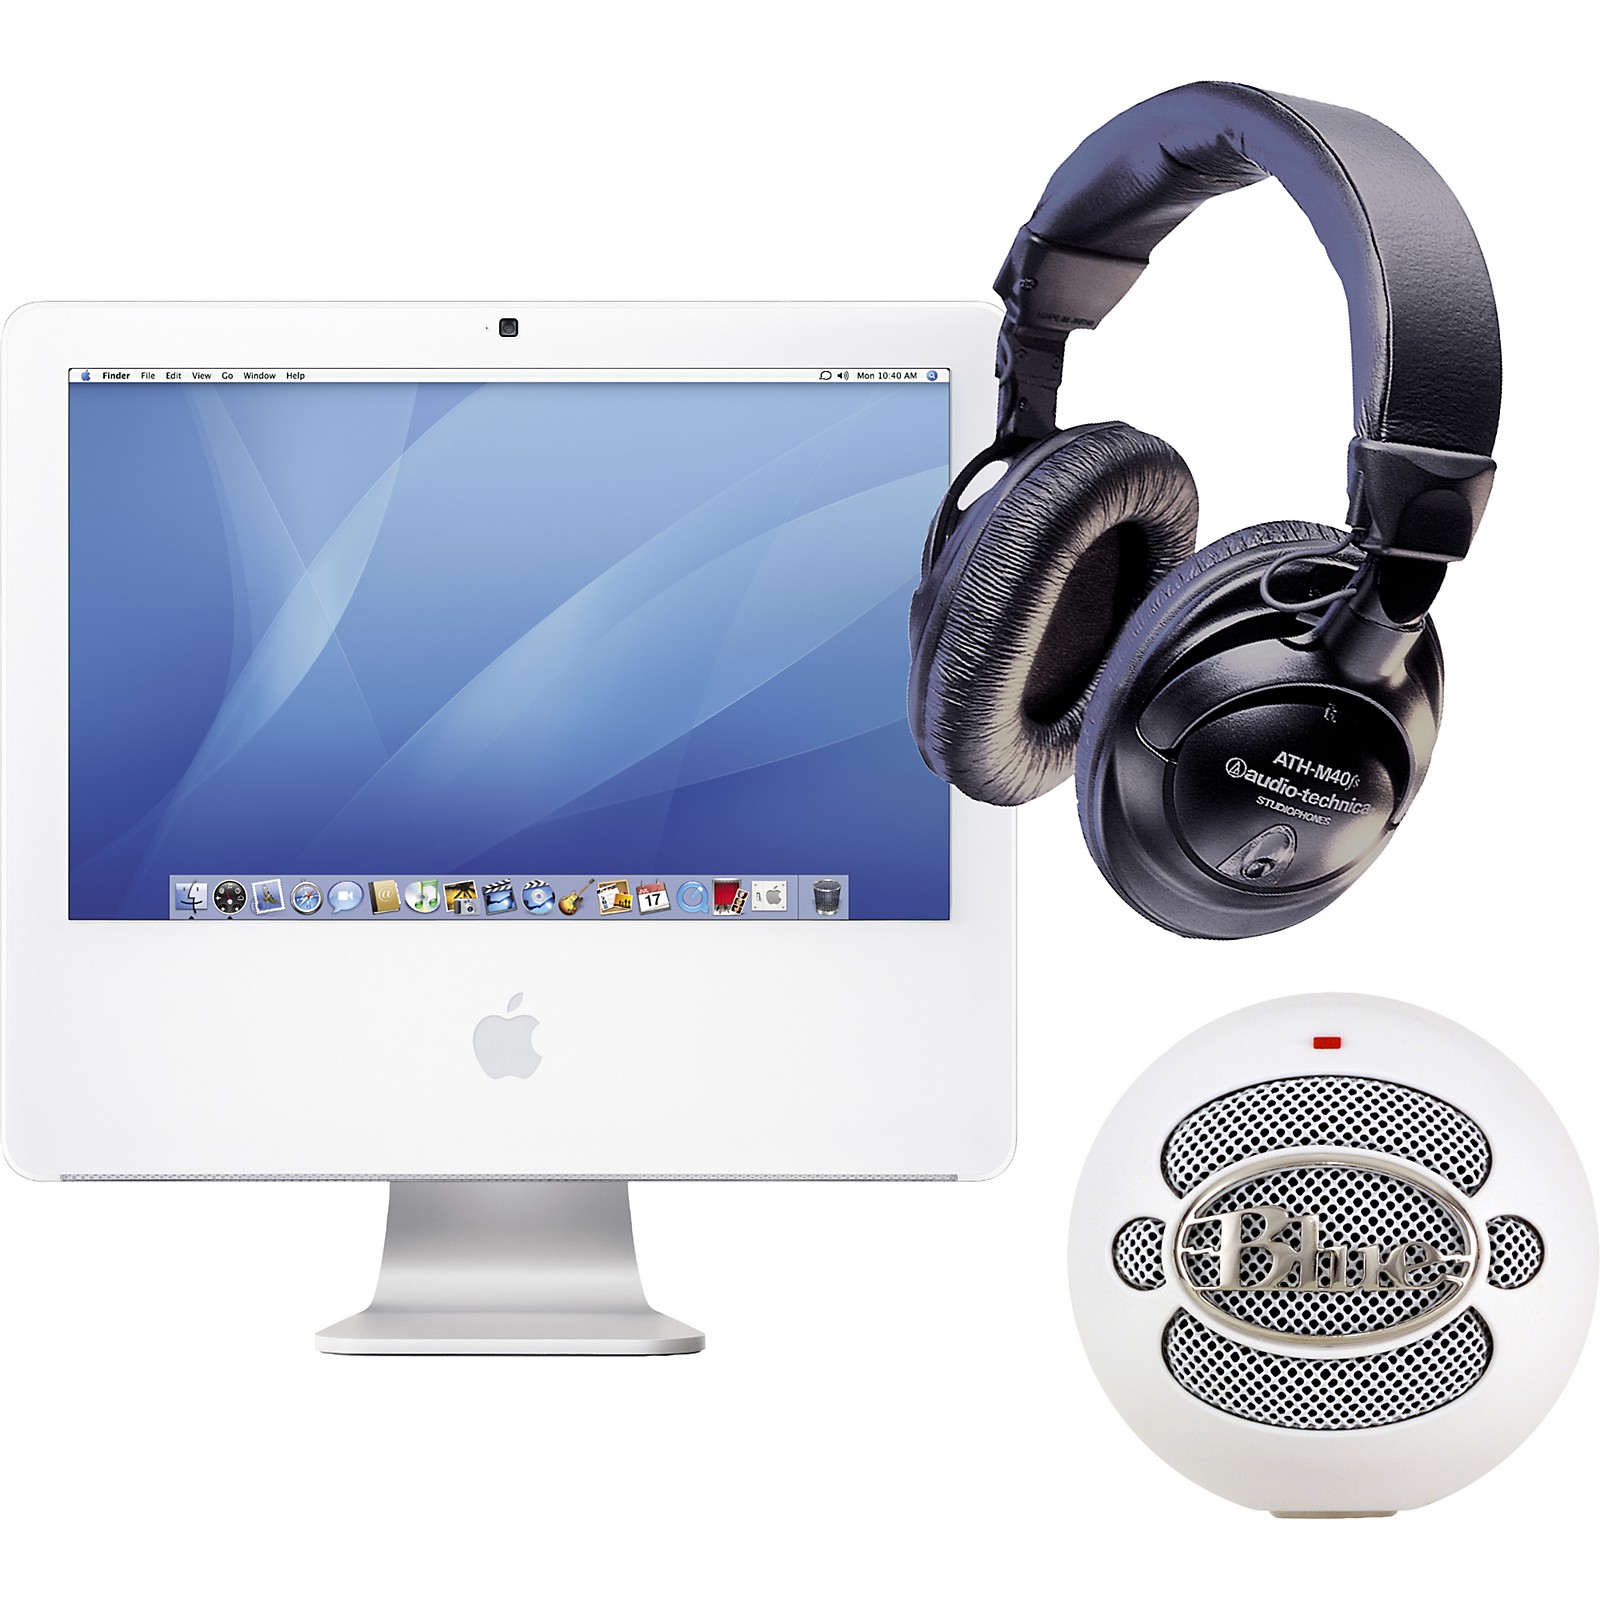 what you need in an imac for recording